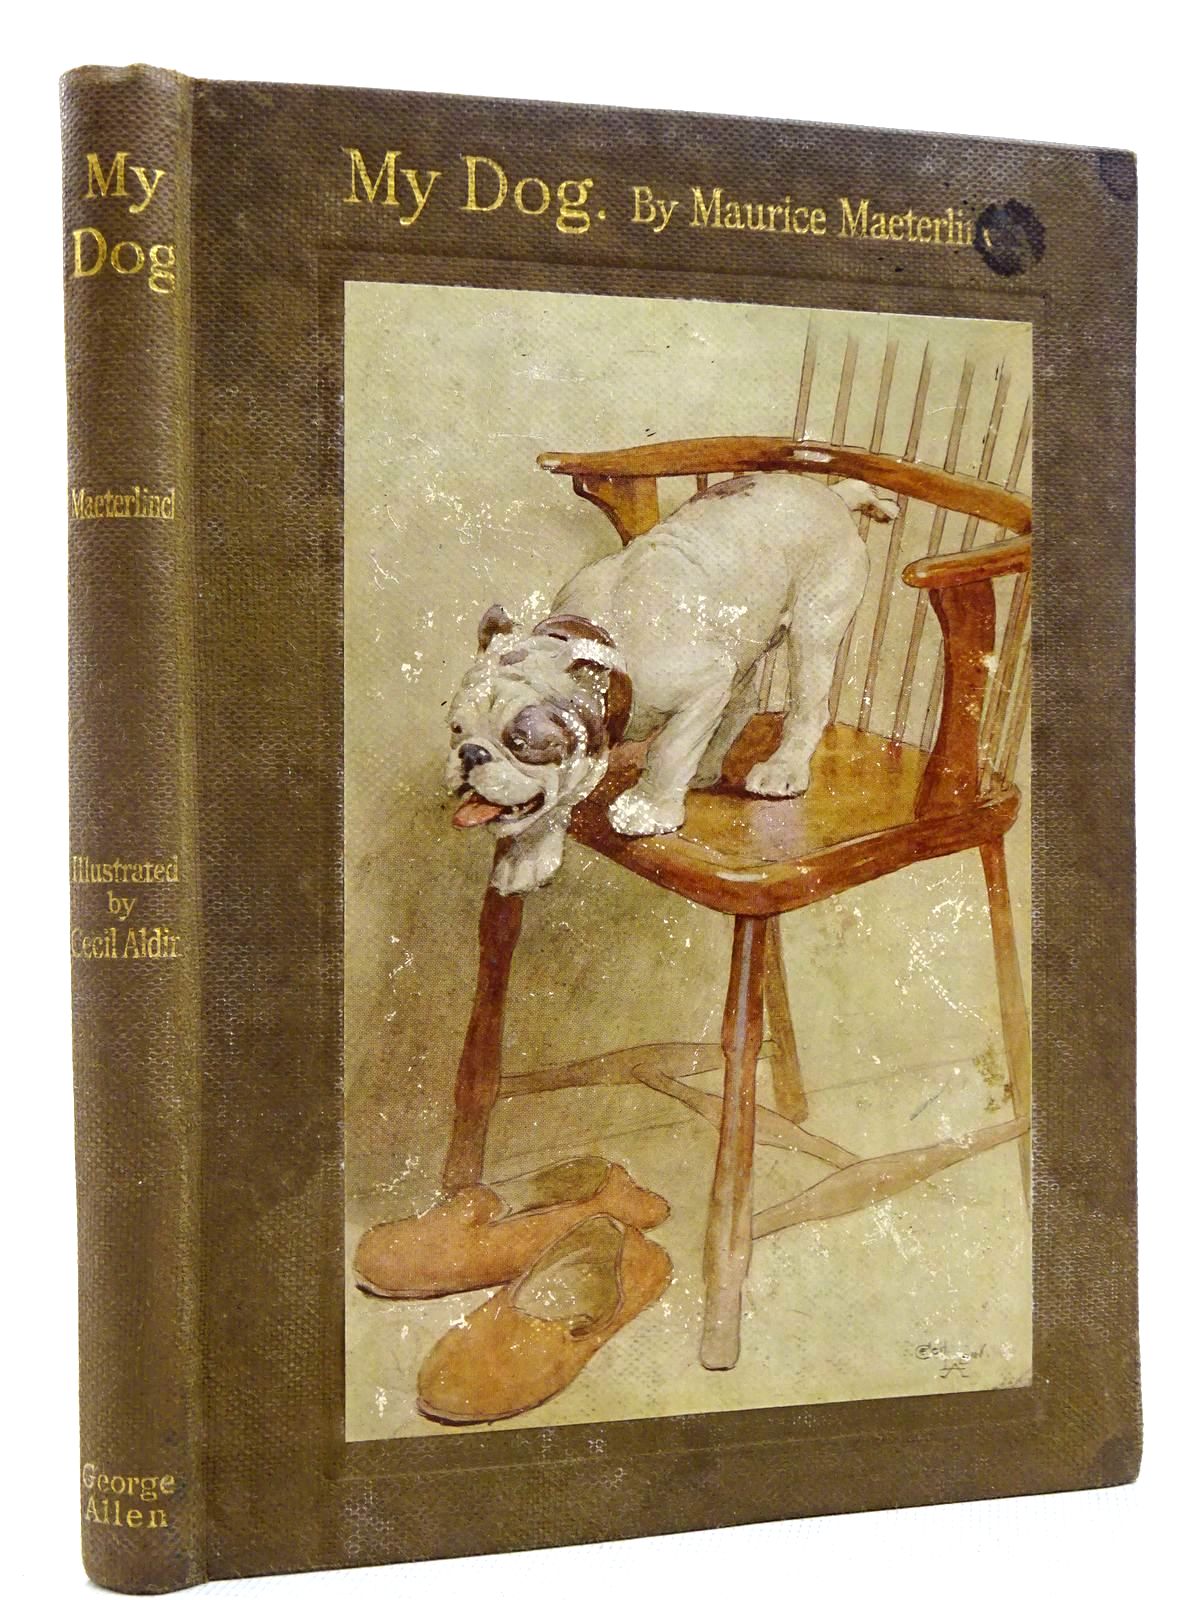 Photo of MY DOG written by Maeterlinck, Maurice illustrated by Aldin, Cecil published by George Allen and Co. Ltd. (STOCK CODE: 2128944)  for sale by Stella & Rose's Books